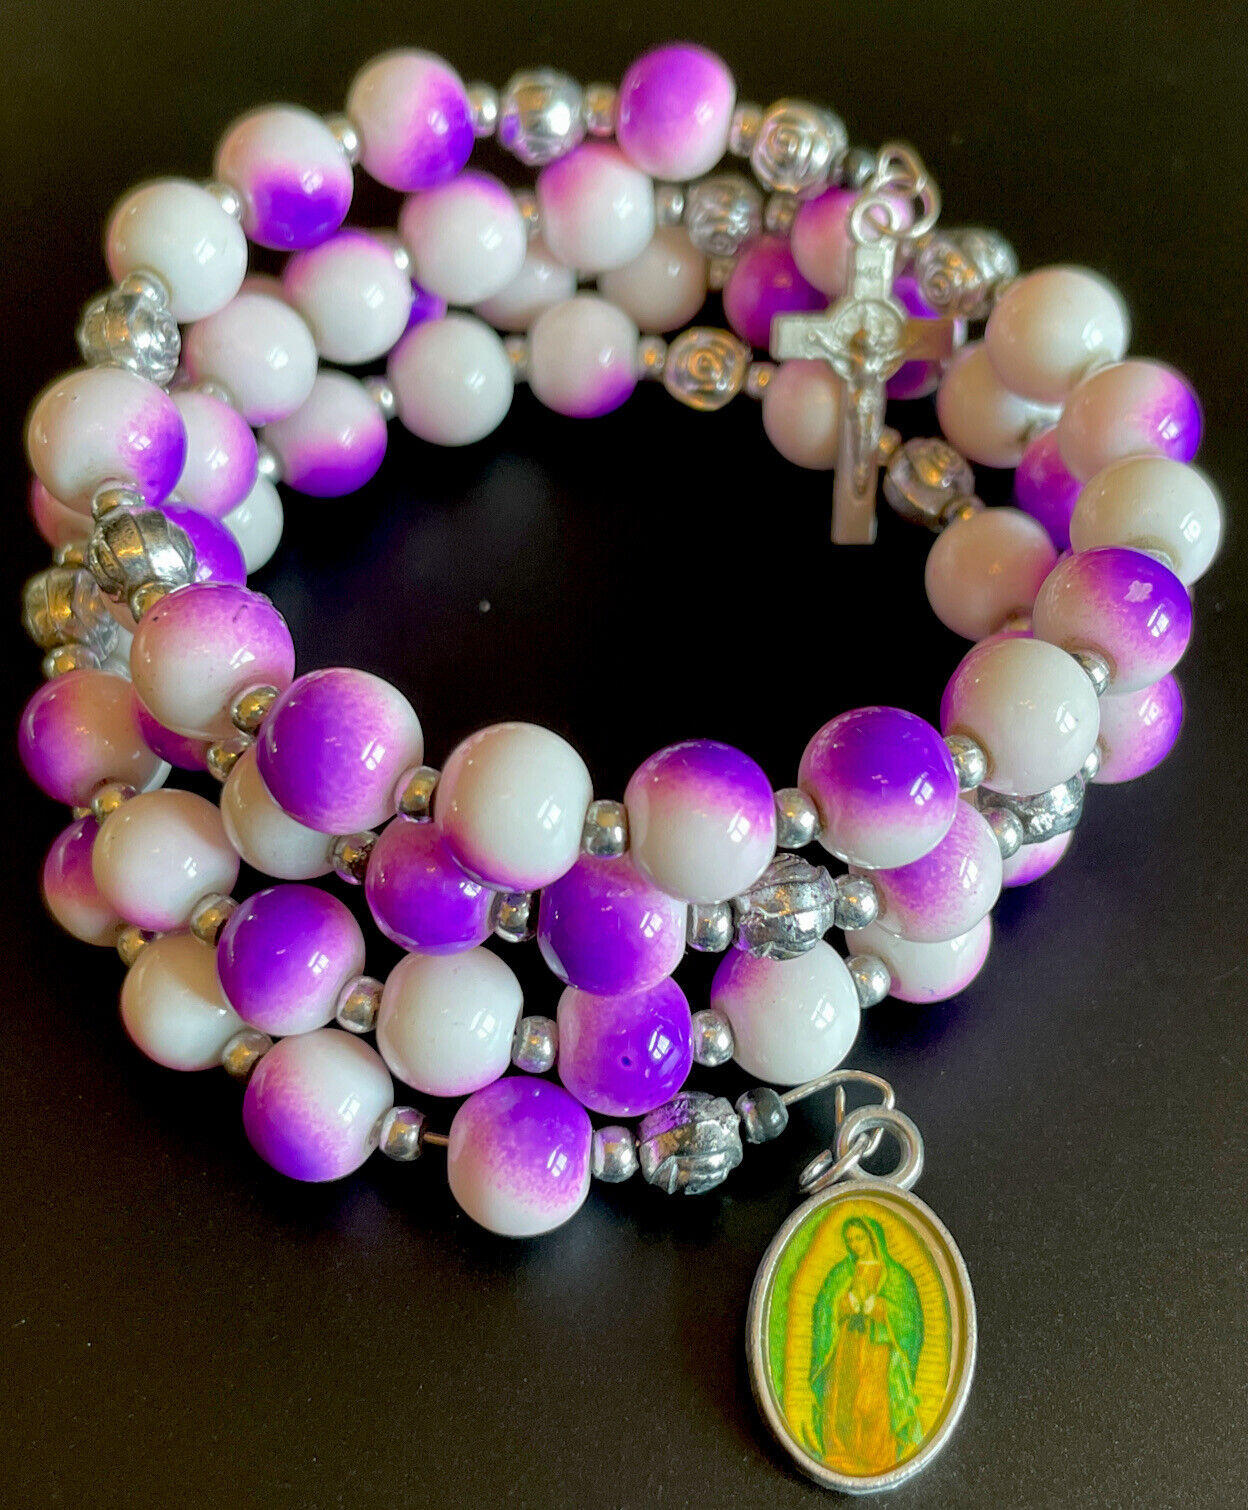 Vintage Hombre Purple White Glass 5 Decade Rosary Coil Bracelet Guadalupe Medal